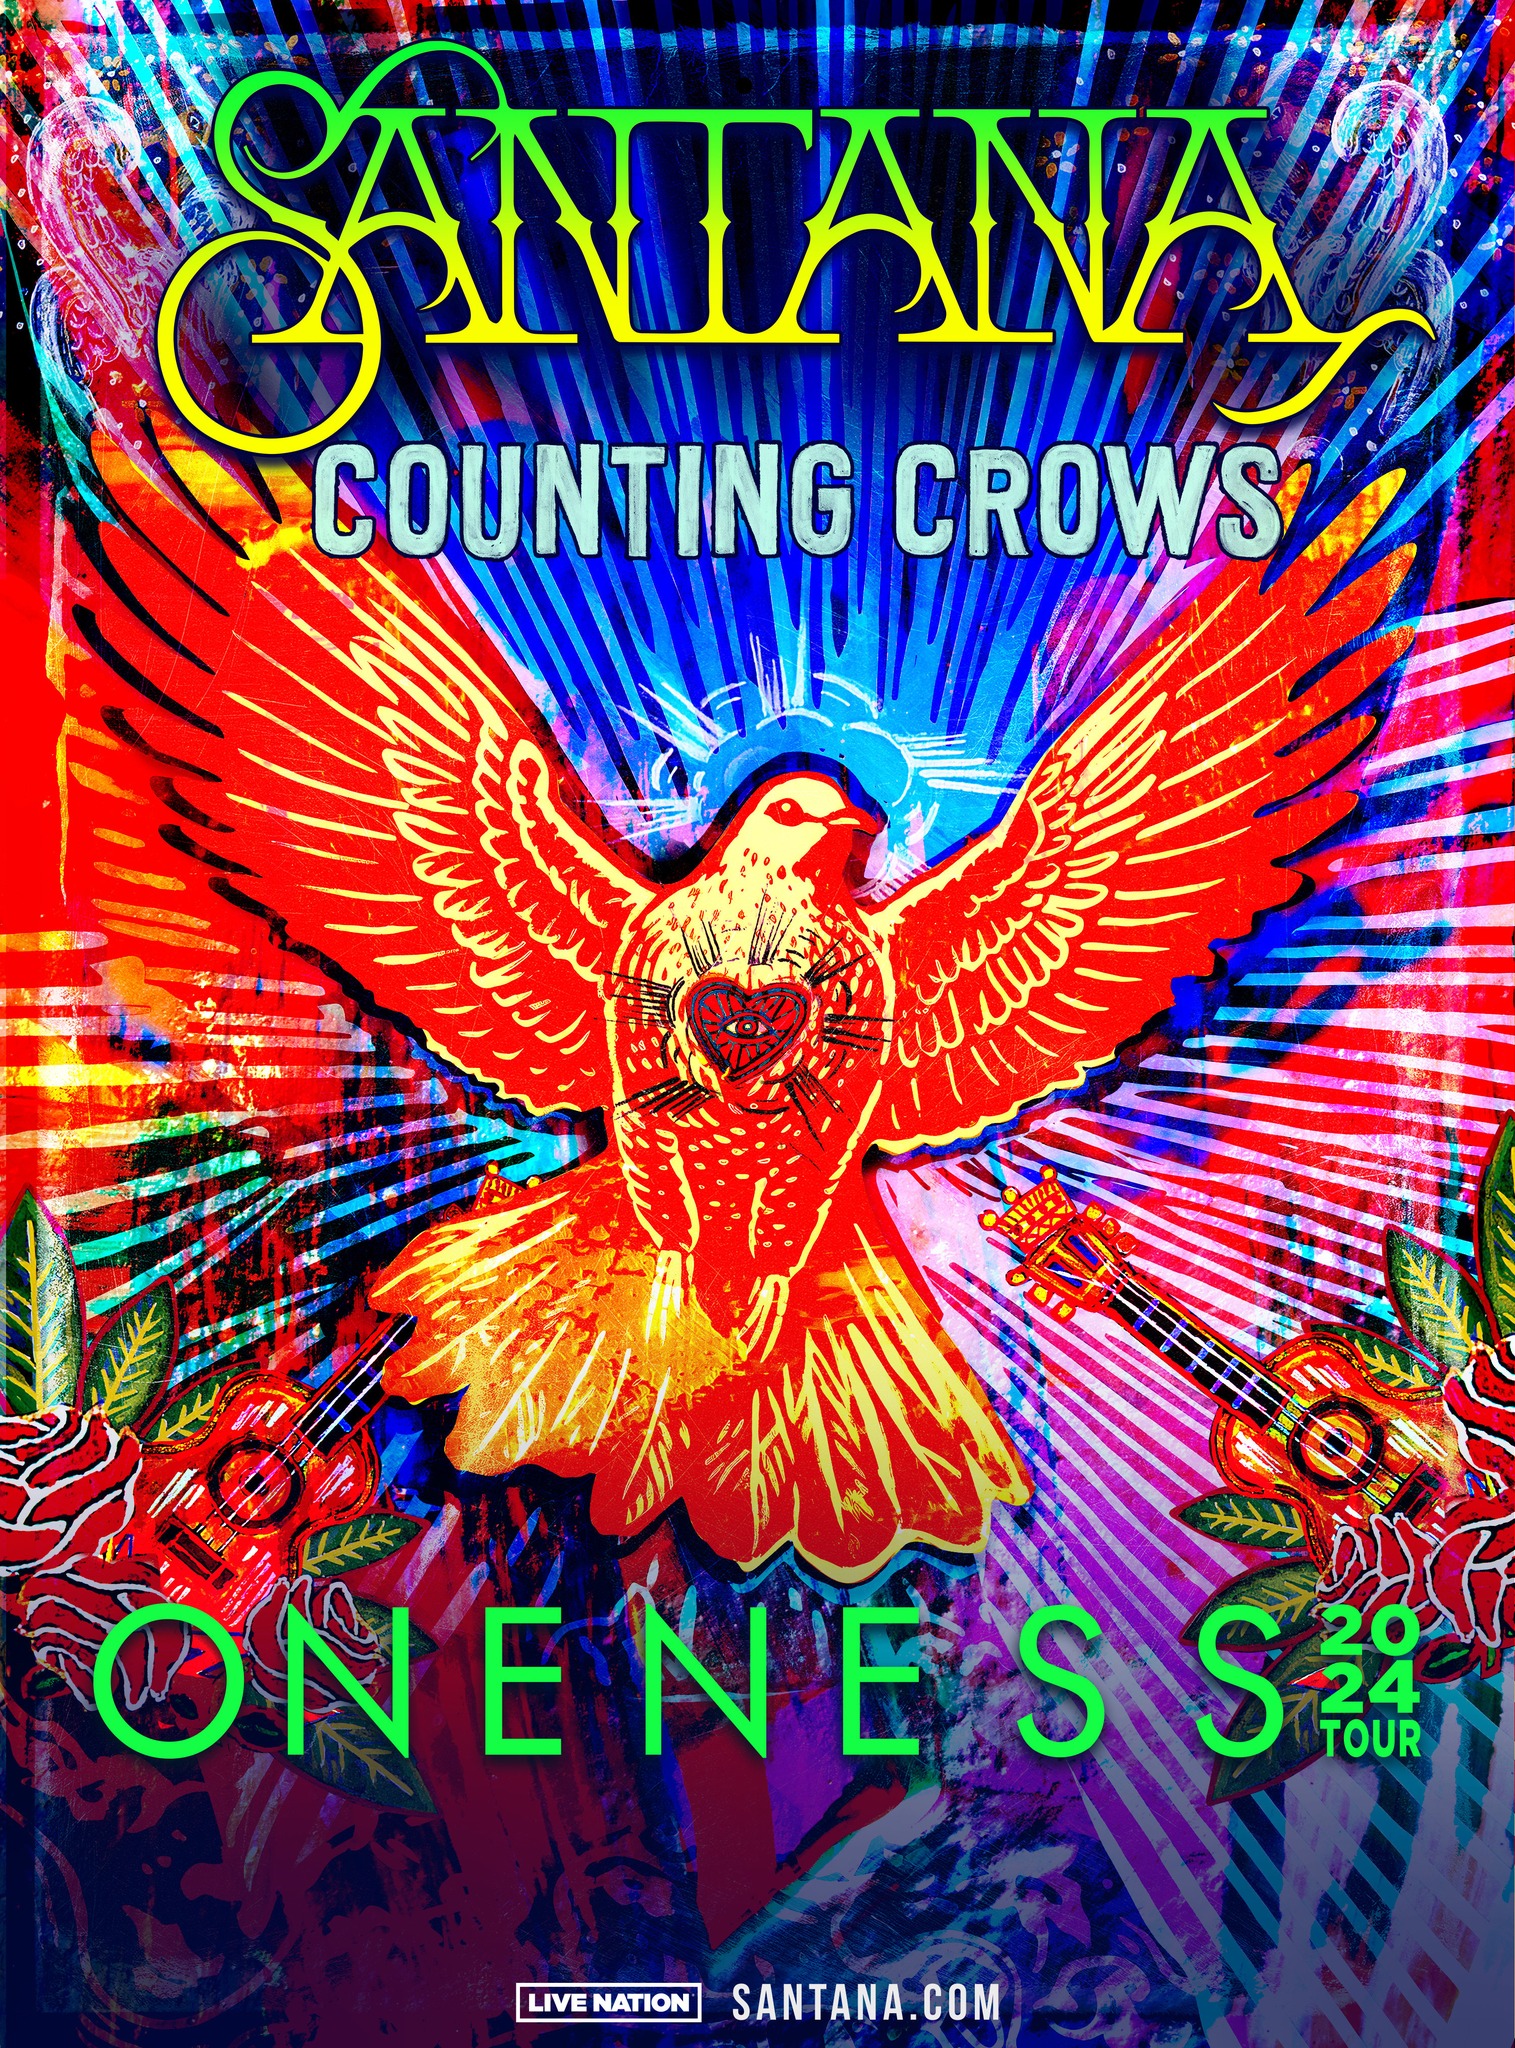 Carlos Santana and Counting Crows Announce the Oneness Tour Across North America This Summer